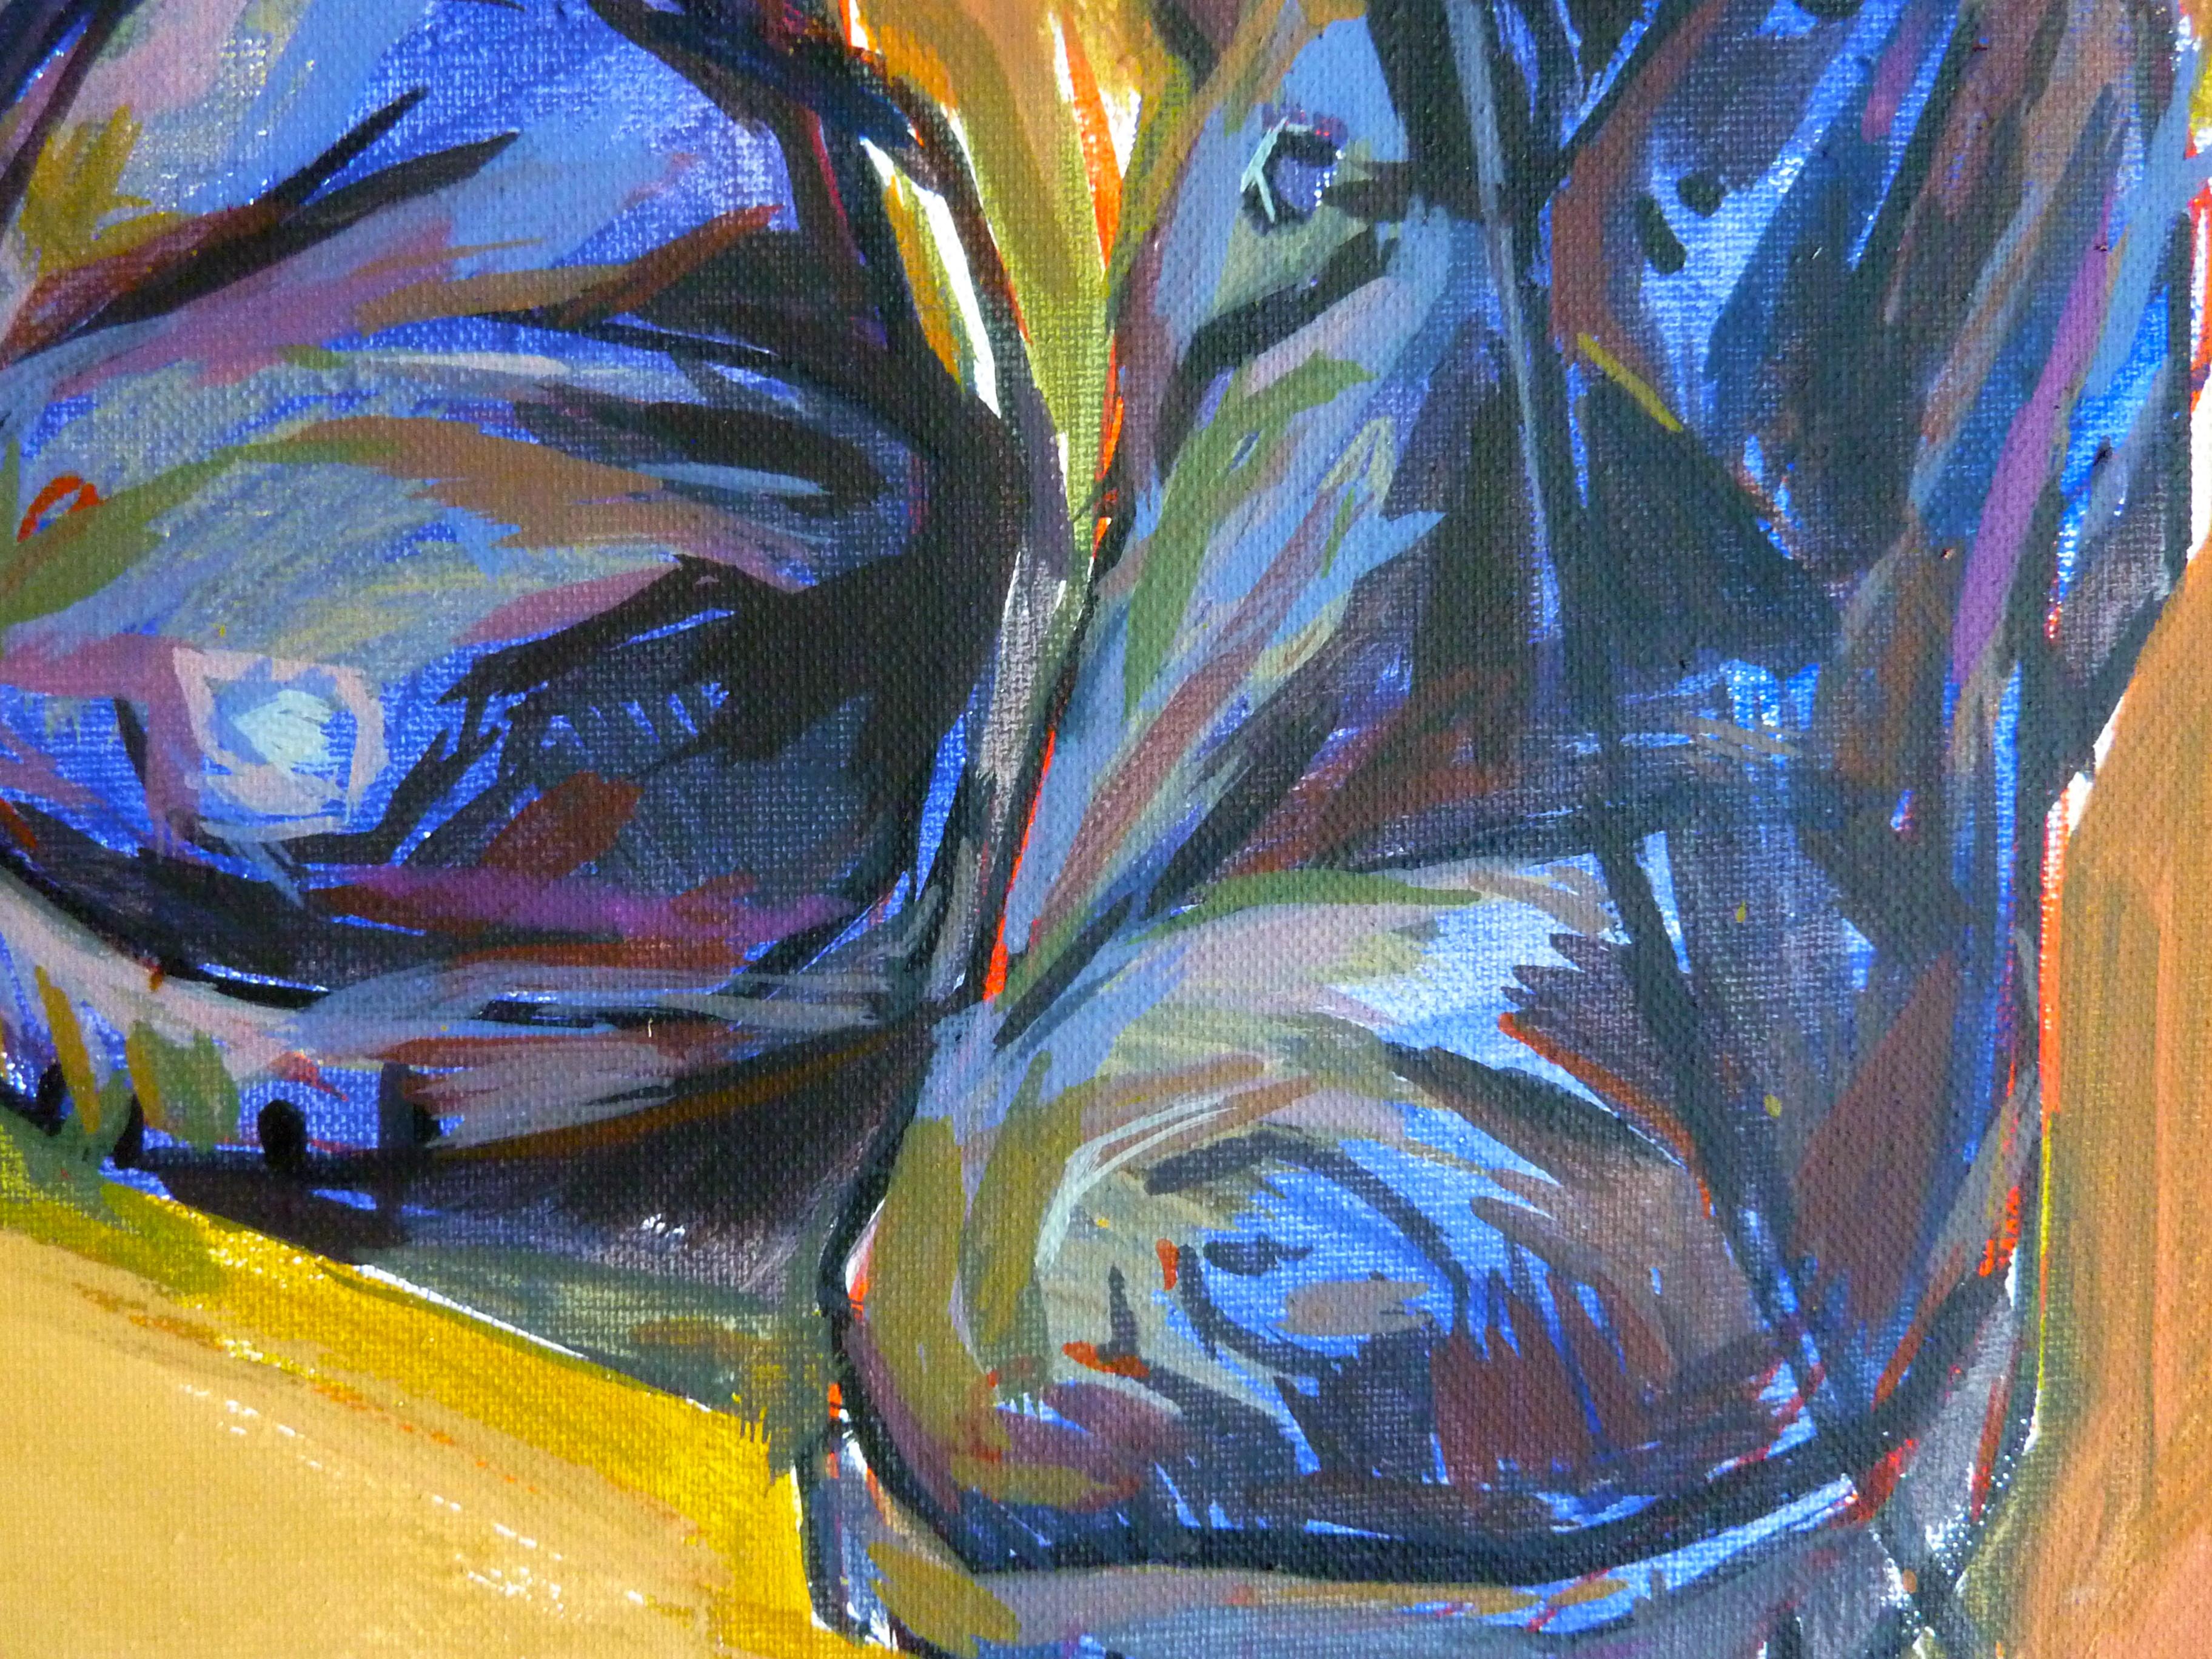 Vincent's Shoes - 21st Century Contemporary Expressionist Acrylic Painting - Brown Still-Life Painting by Nikol Klampert